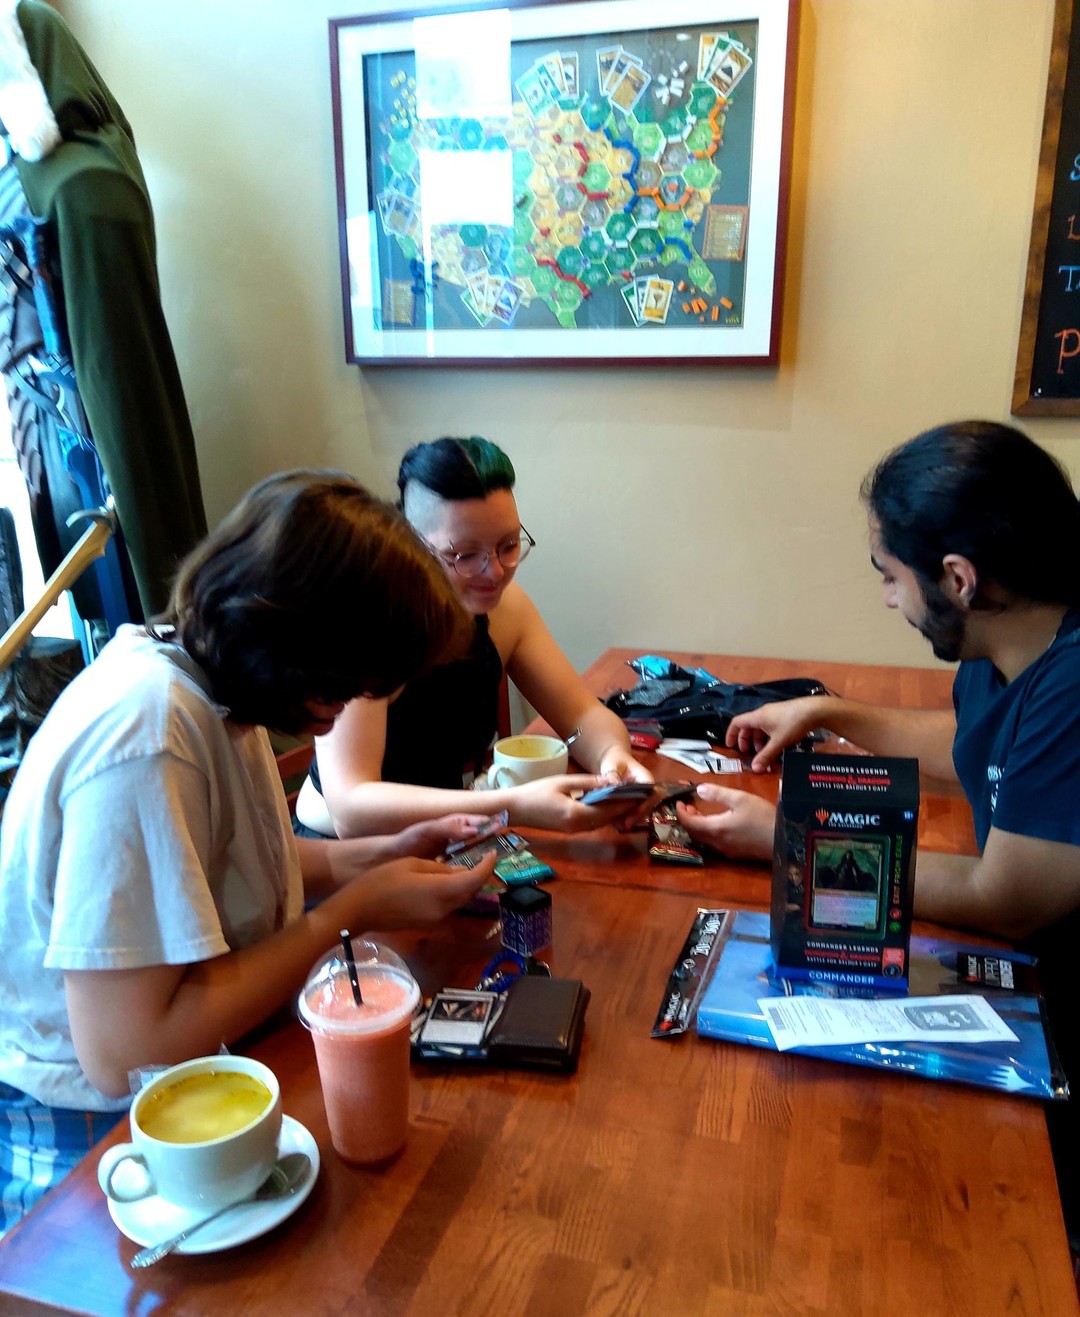 Ah, The Gnoshery, a place for food, fun, and wicked cool Magic the Gathering pulls! Bring your friends, grab a snack, and find something fun to take home! If you feel so inclined, stick around and try out our Stay and Play Library!

#thegnoshery #mtg #boardgamecafe #gnoshgnosh